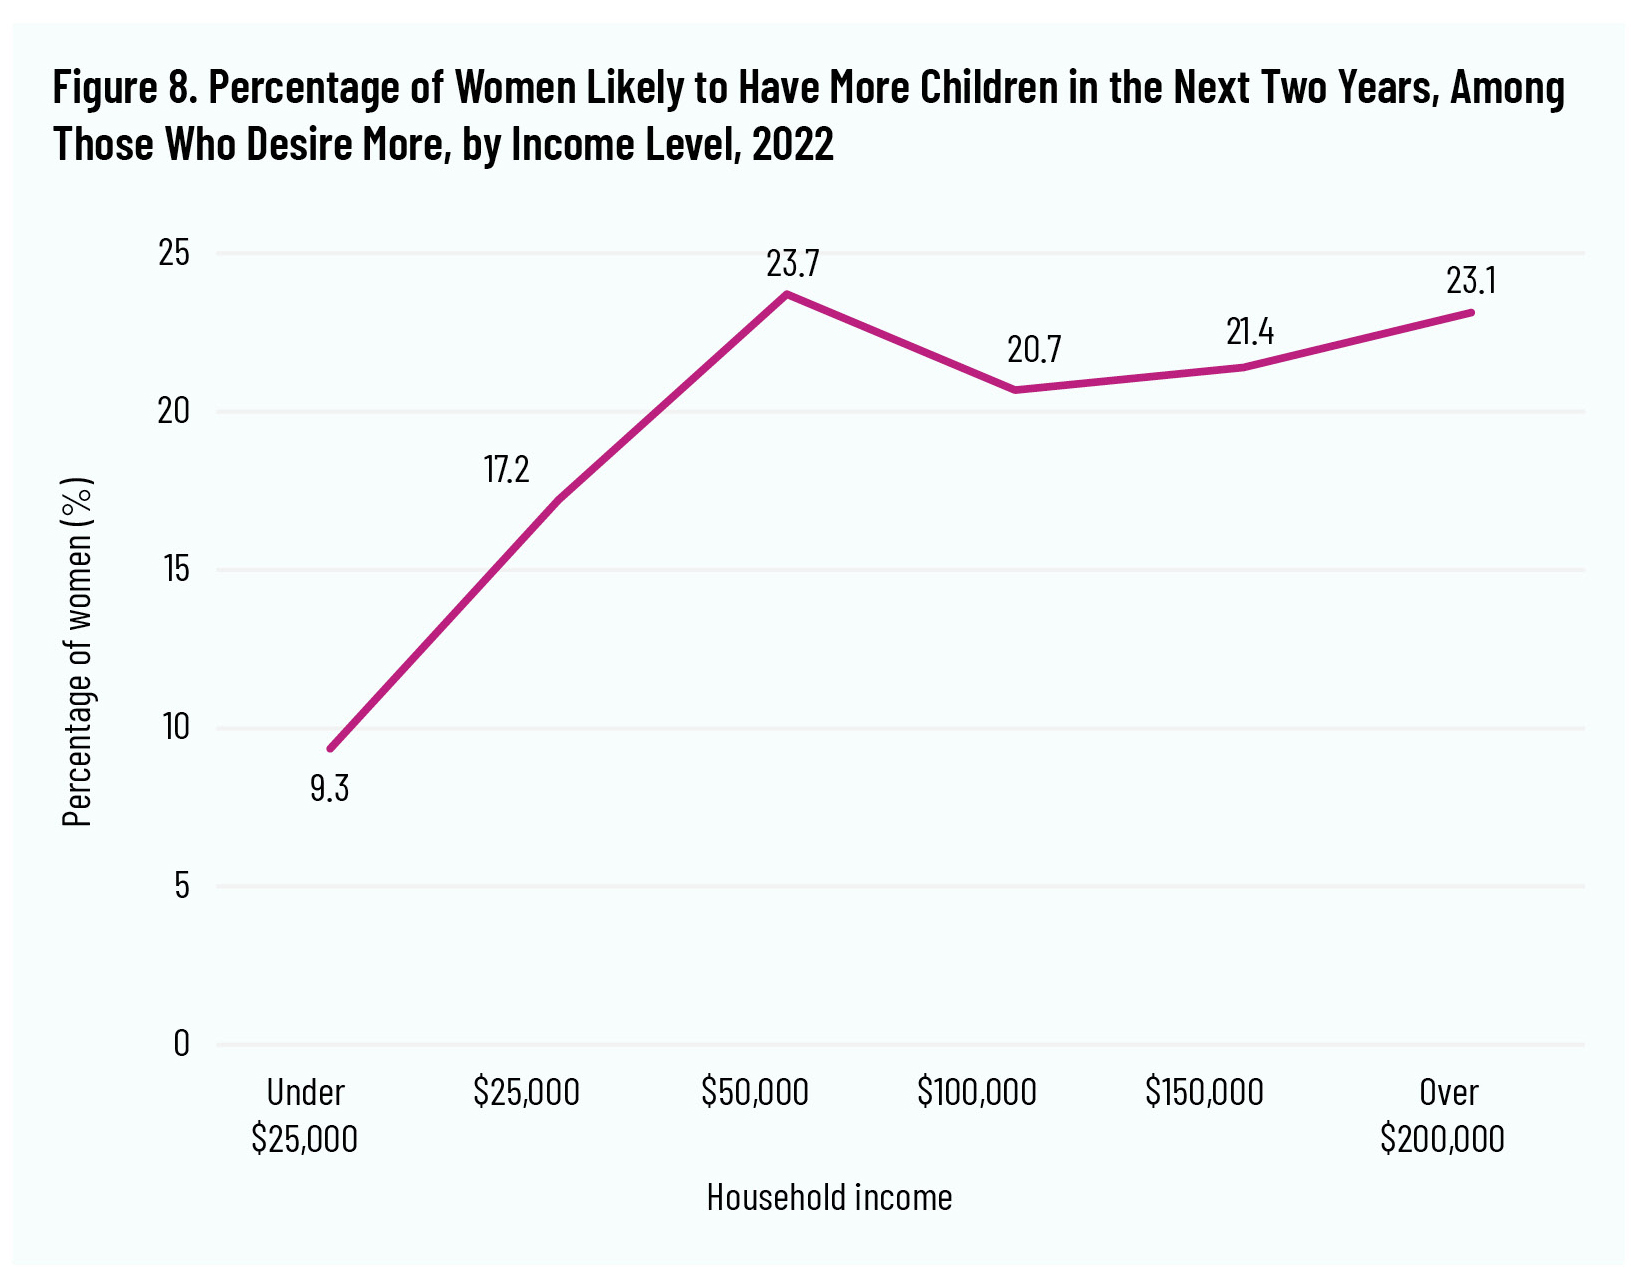 Figure 8. Percentage of Women Likely to Have More Children in the Next Two Years, Among Those Who Desire More, by Income Level, 2022